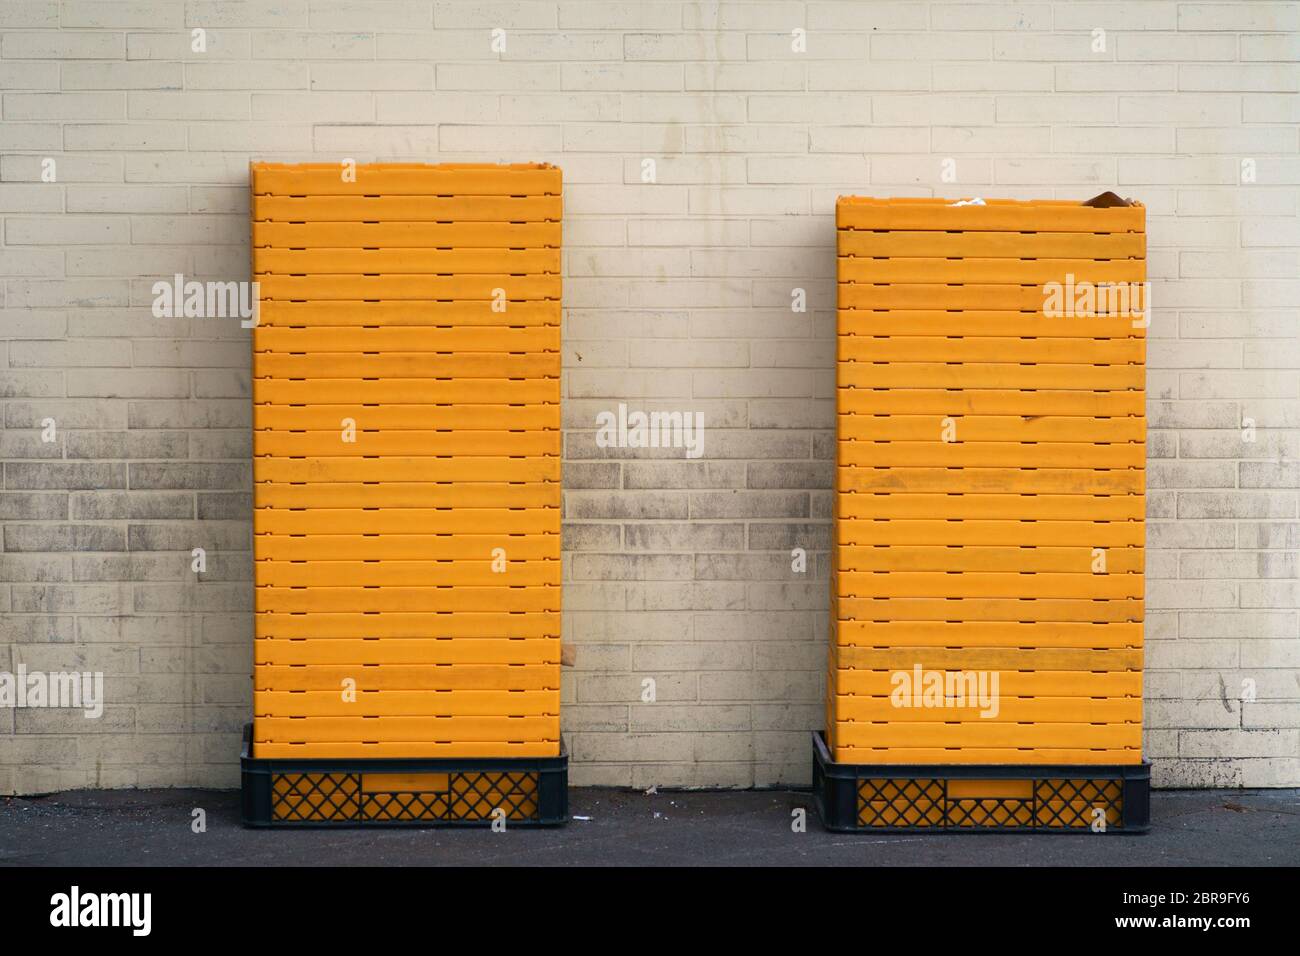 Stacked vegetables boxes and bread boxes in the backyard of a shopping mall. Stock Photo